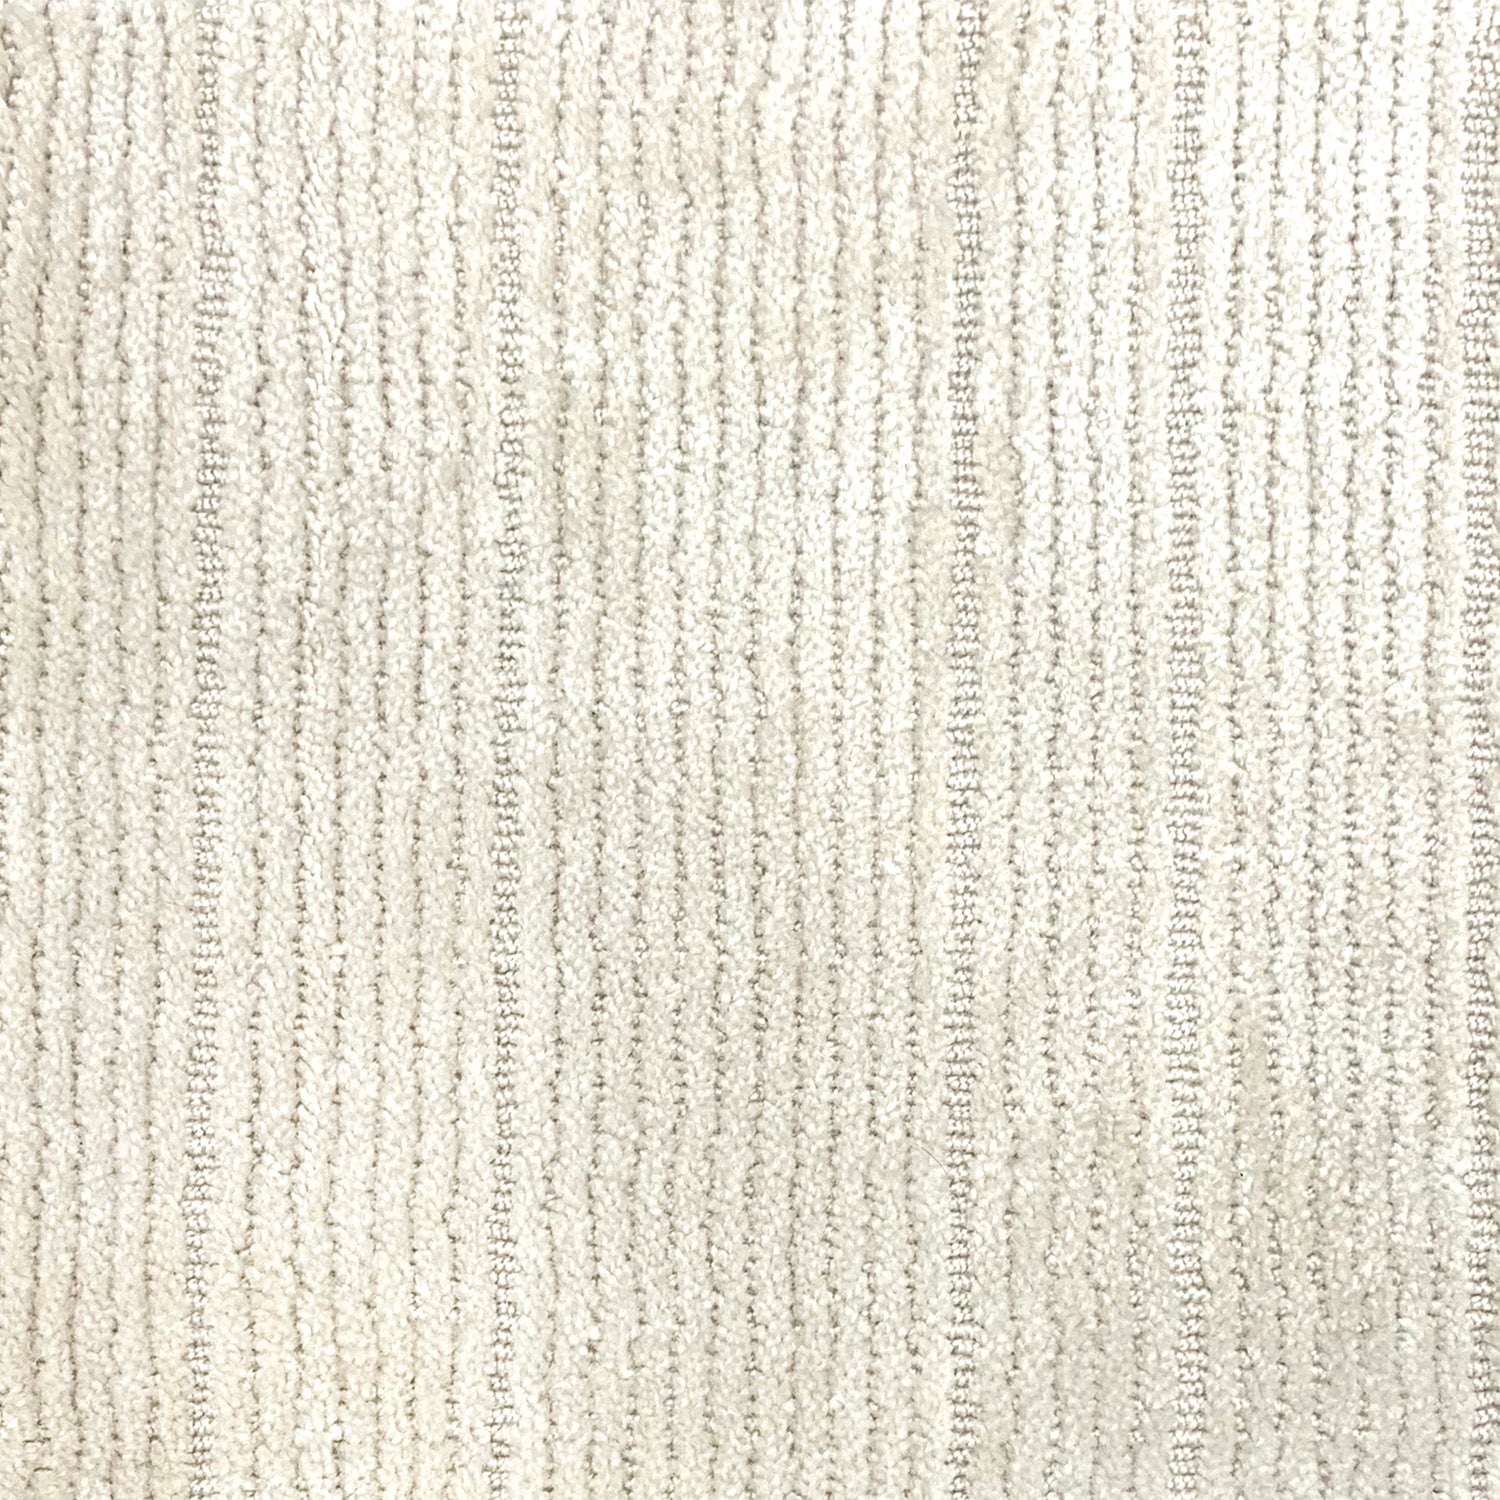 Nylon broadloom carpet swatch in a ribbed weave in ivory.